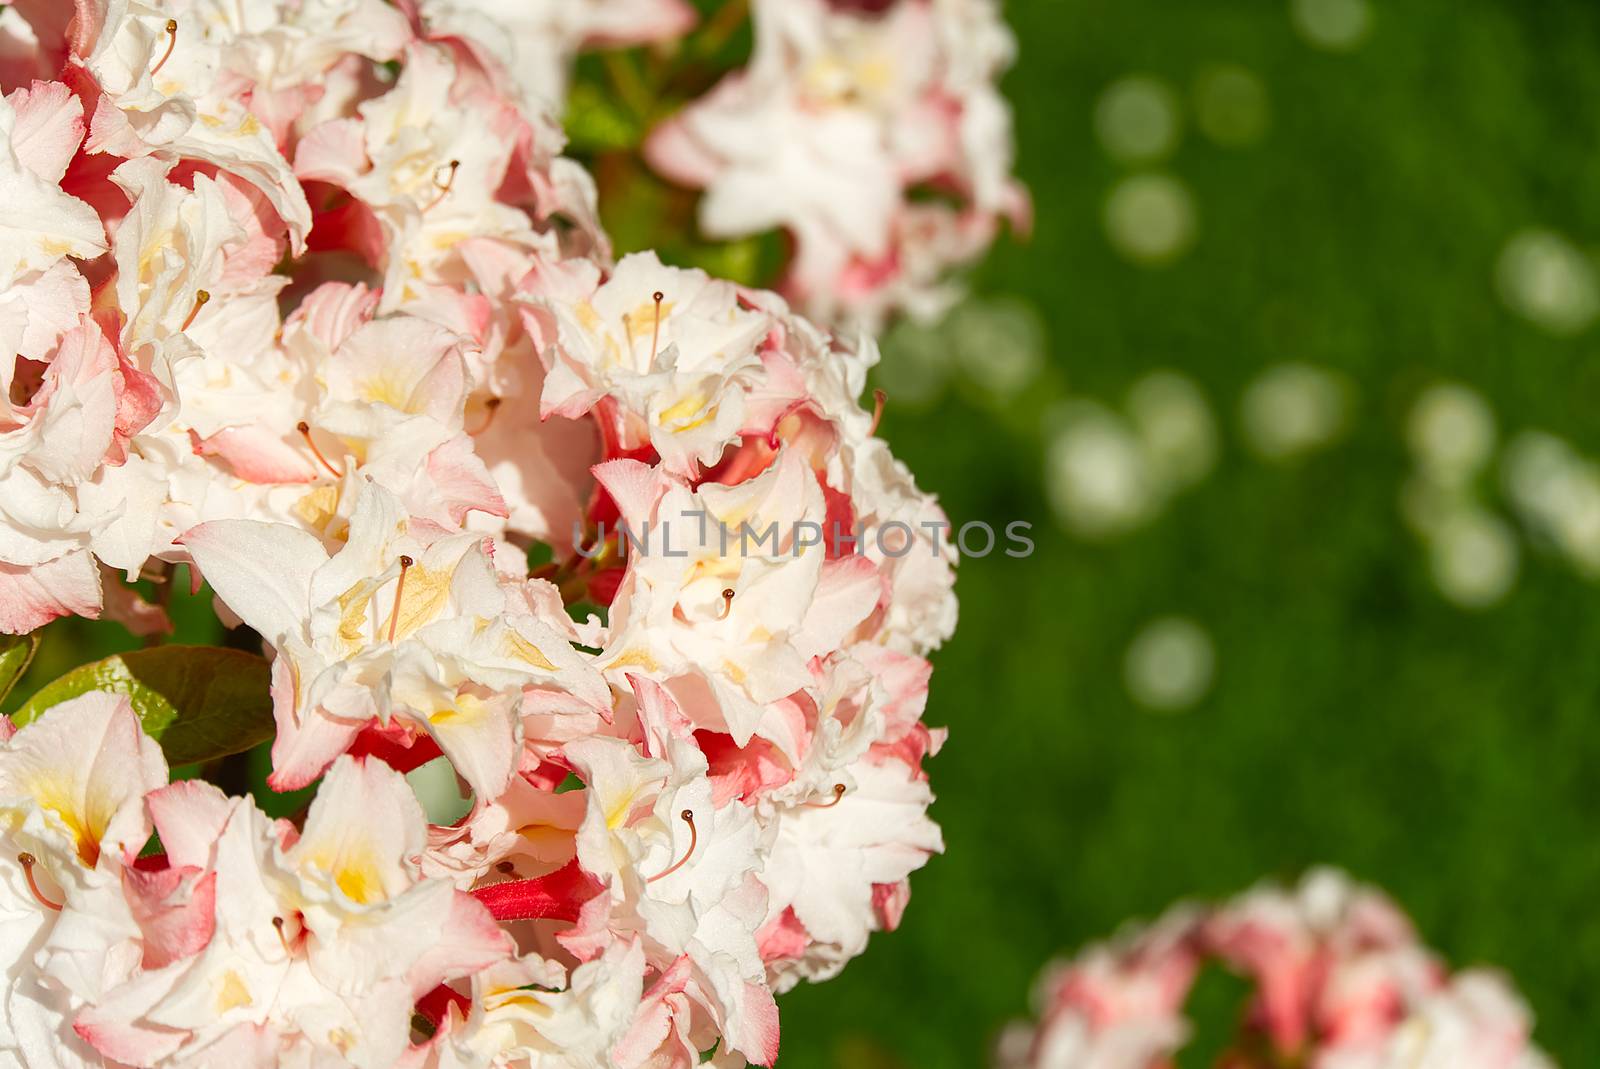 White, soft pink rhododendron flowers in summer park, blurry green leaves, natural organic background